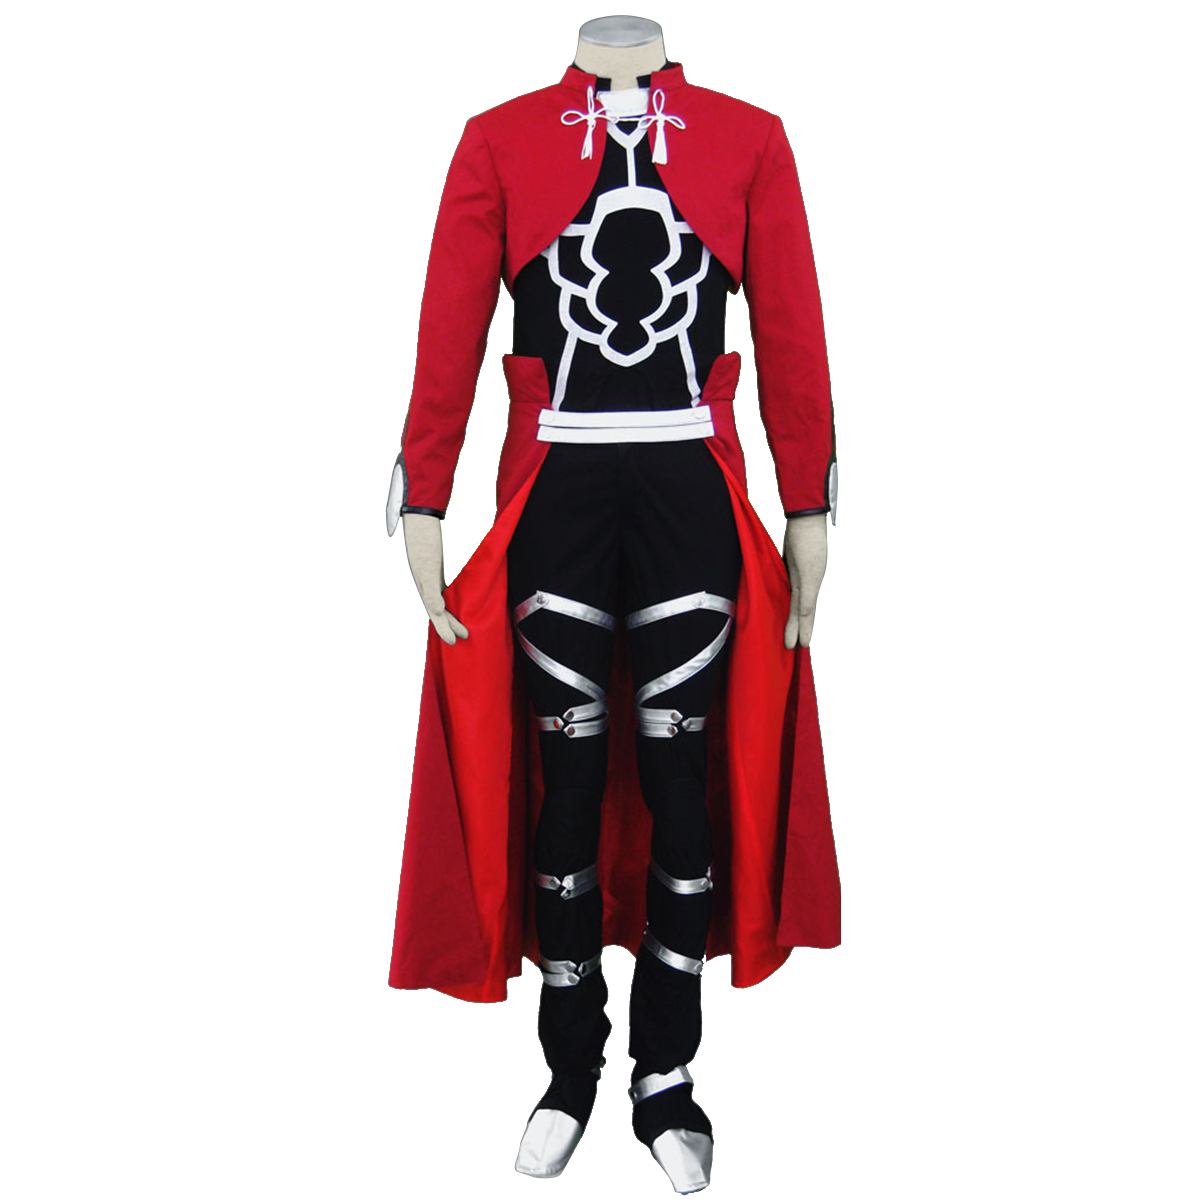 The Holy Grail War Archer Anime Cosplay Costumes Outfit